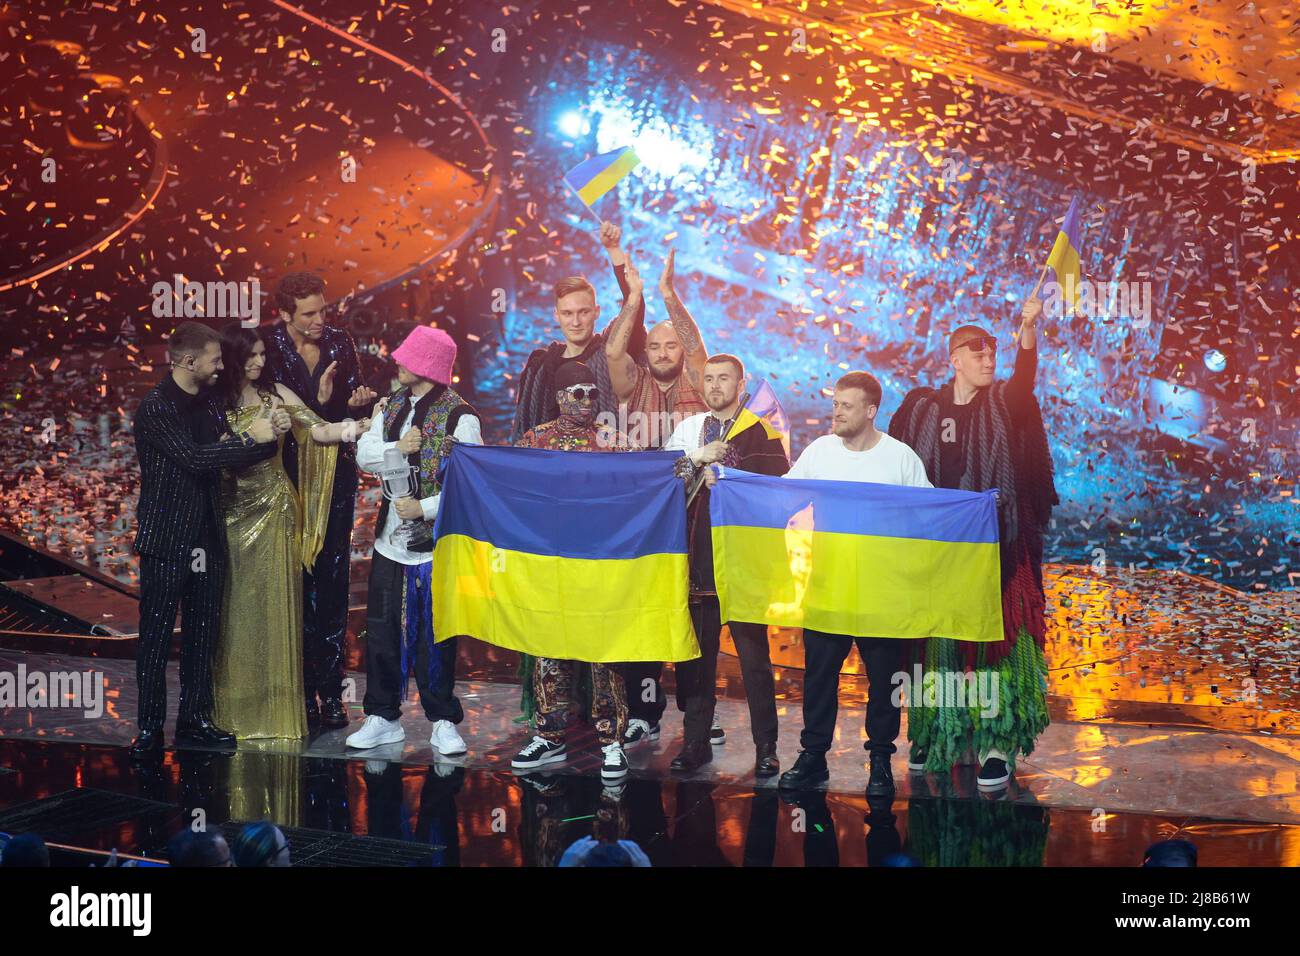 Turin, Italy. 14th May, 2022. Kalush Orchestra (Stefani?) Ukraine The winners of he Eurovision Song Contest Grand Final on 14 May 2022 at Pala Olimpico, Turin, Italy. Photo Nderim Kaceli Credit: Independent Photo Agency/Alamy Live News Stock Photo